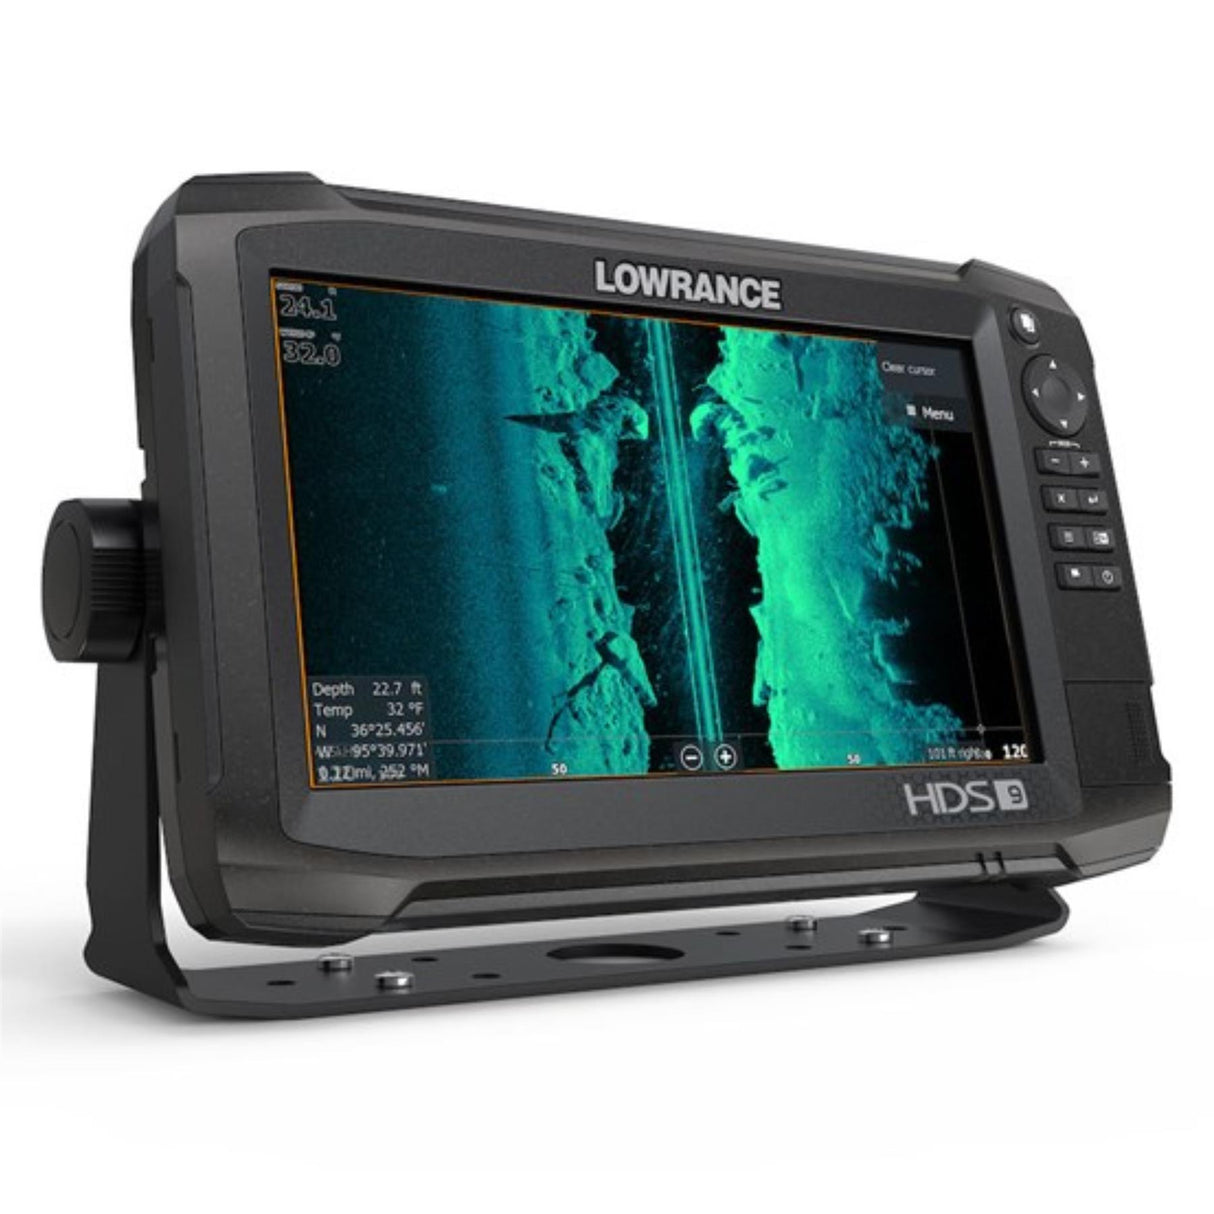 Lowrance HDS 9 Carbon Marine Fishfinder / Chartplotter with TotalScan Transducer